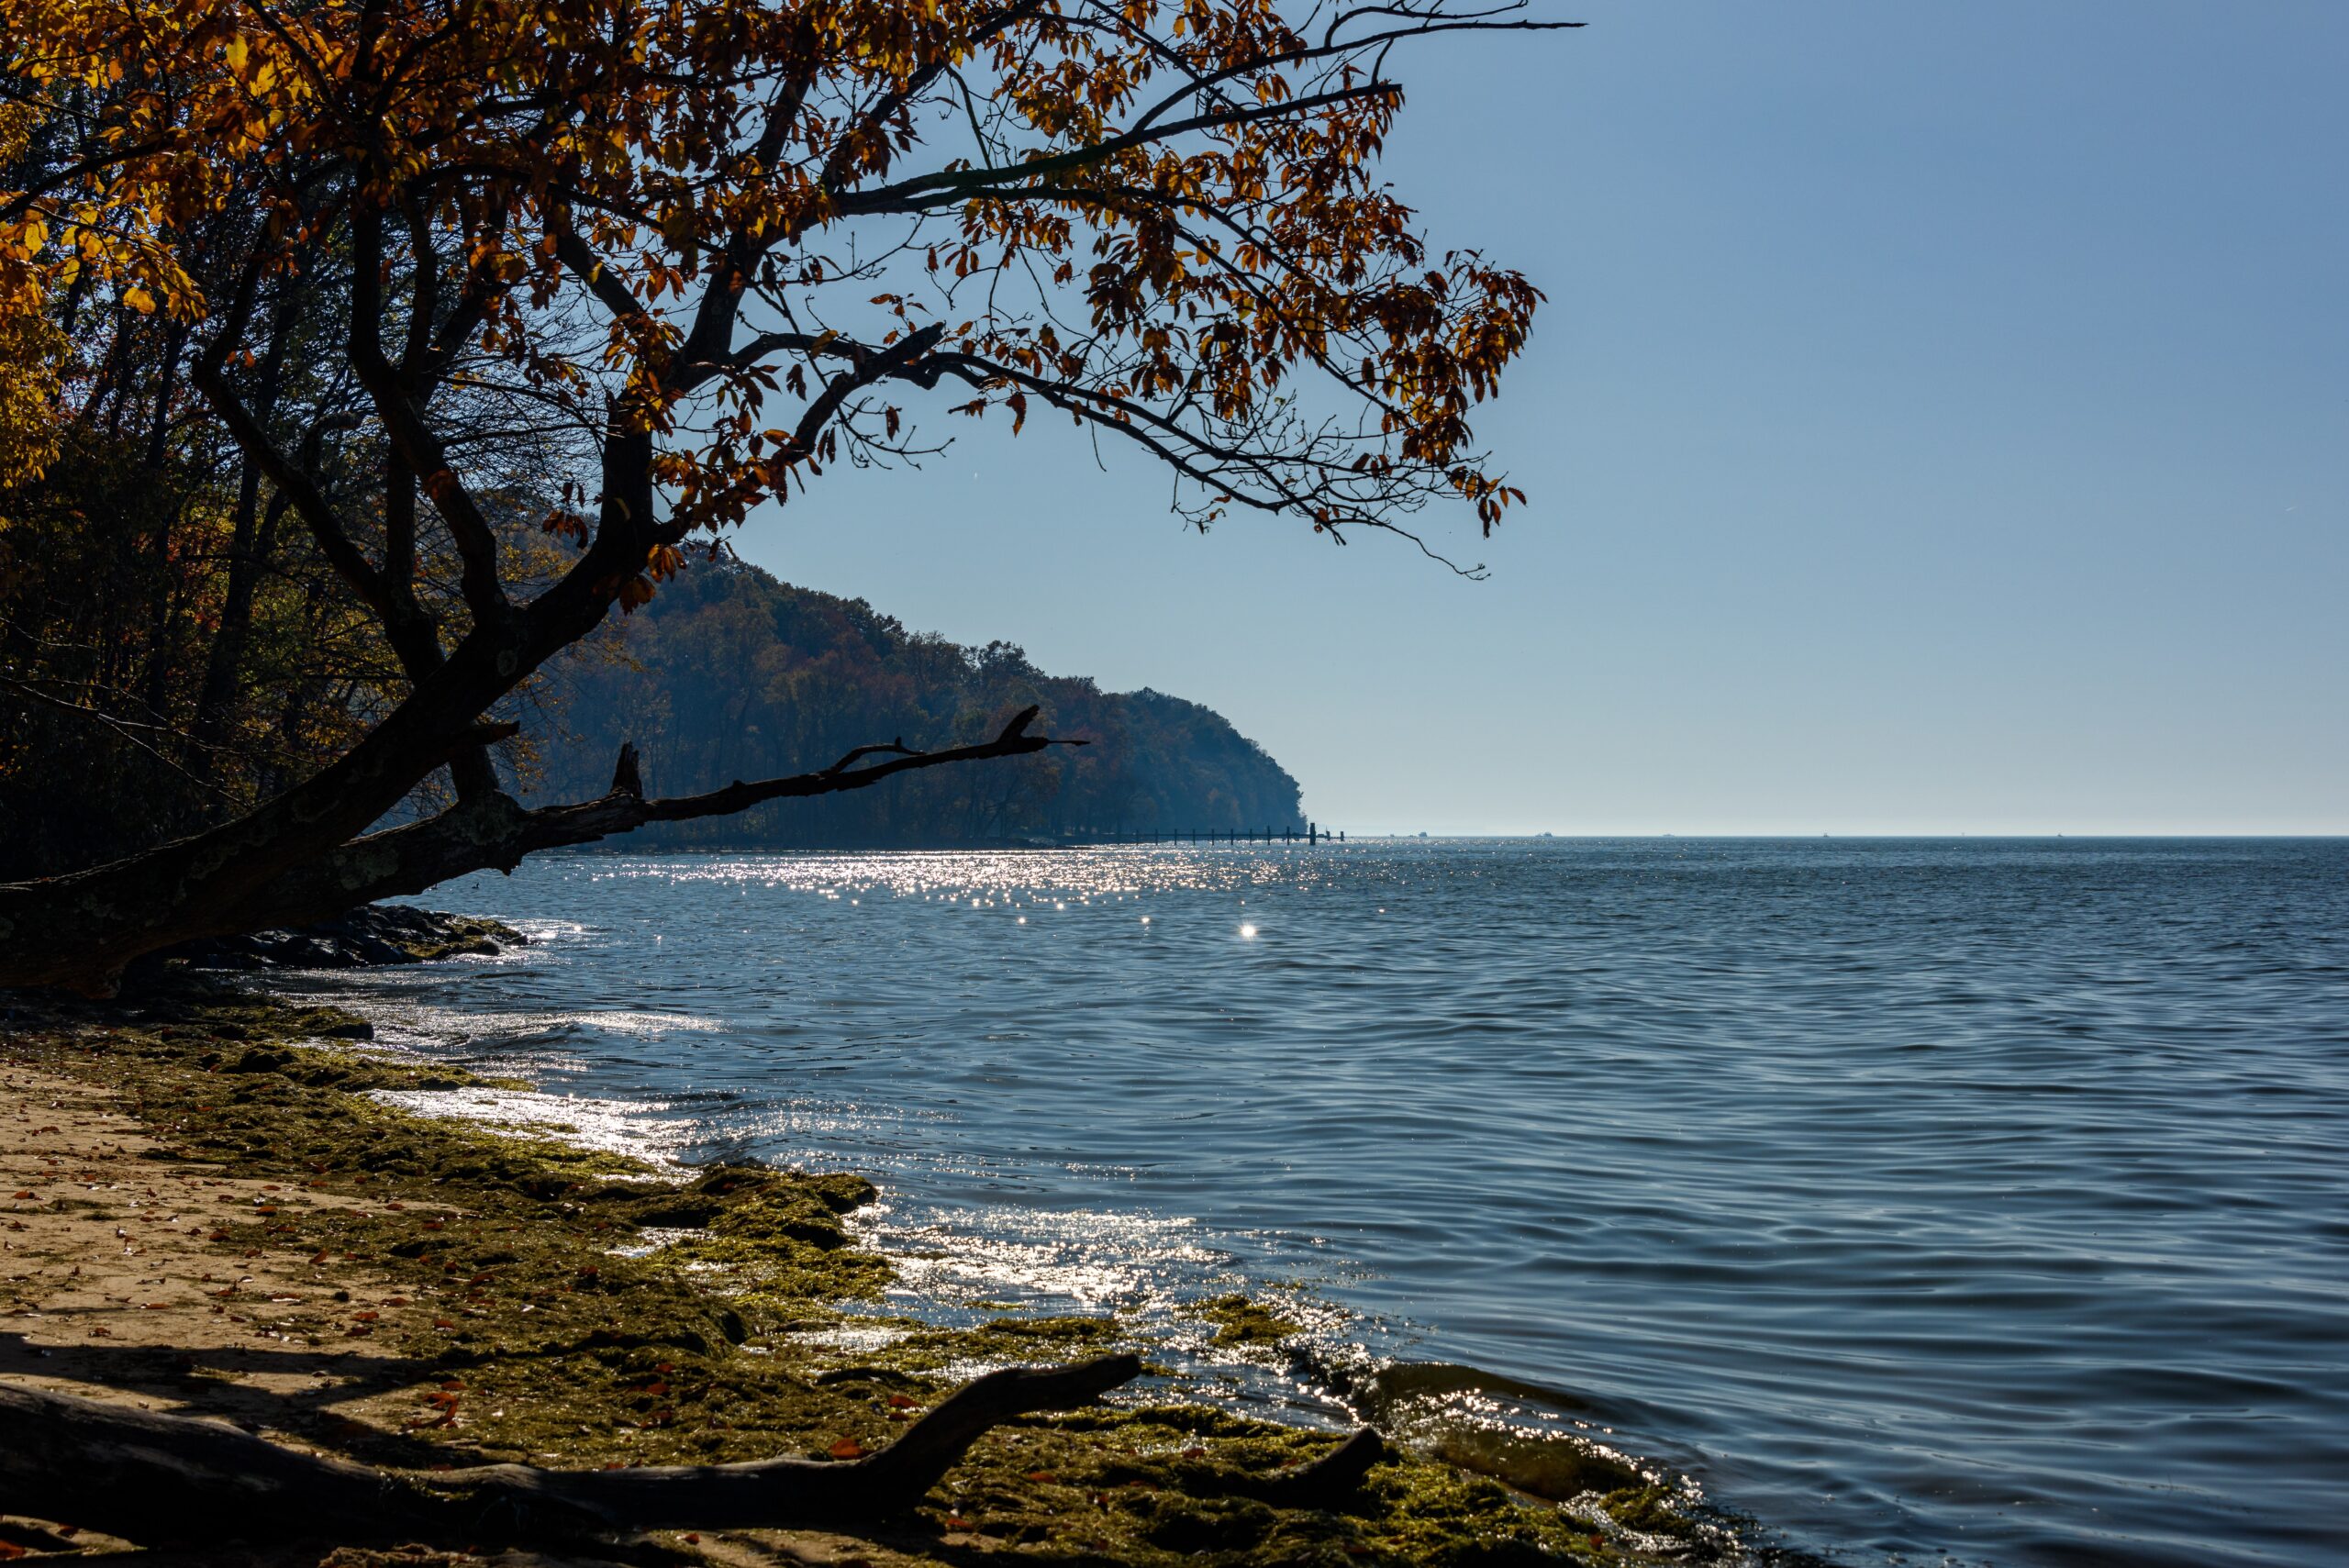 (In)vironmental Justice: Relationships to water in the Chesapeake Bay